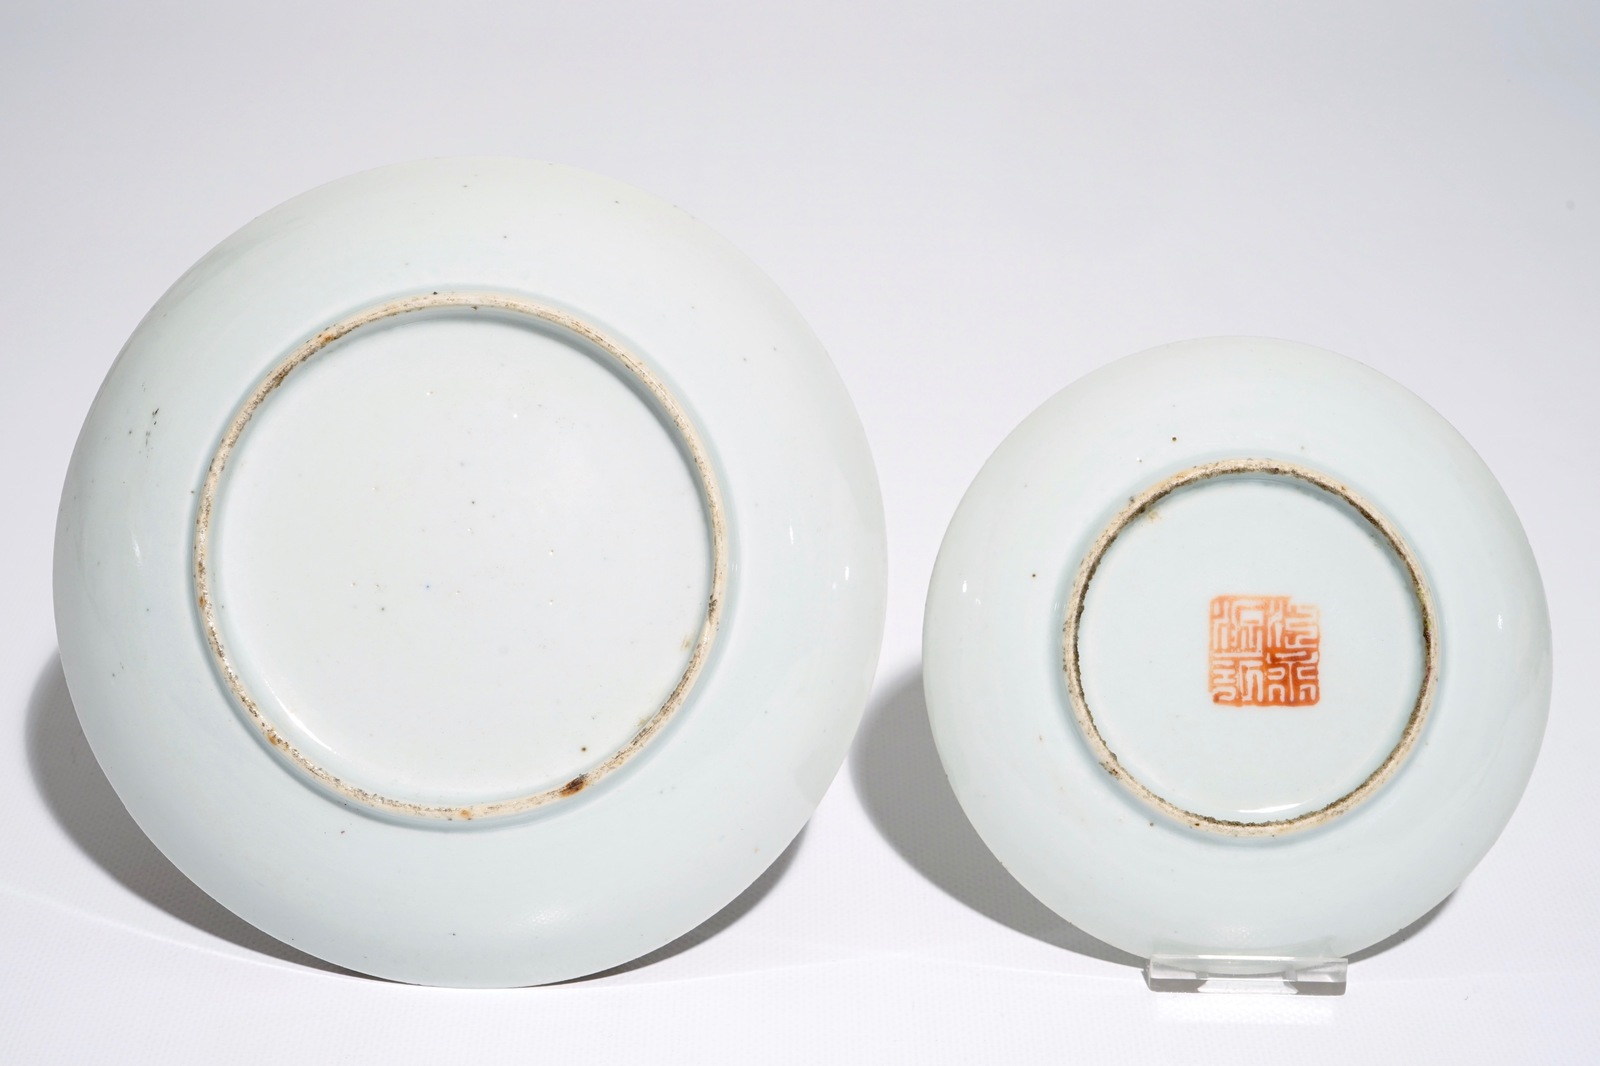 A varied lot of Chinese qianjiang cai porcelain, 19/20th C. Dia.: 17 cm - H.: 12 cm (largest bowl) - Image 3 of 9